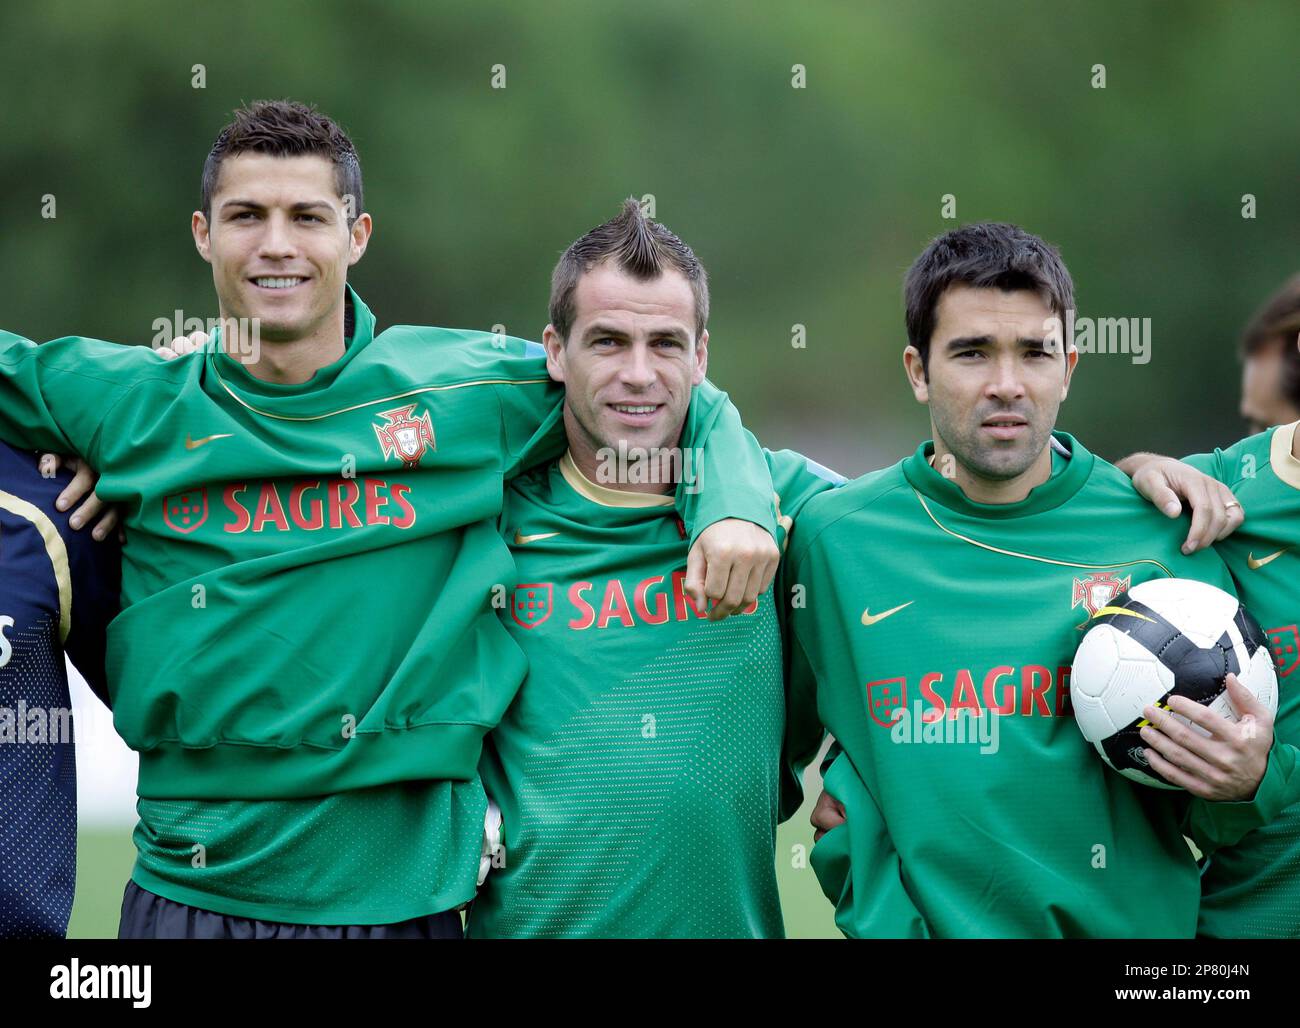 Players Cristiano Ronaldo, Duda and Deco, from left to right, pose for a  photgraph before a training session of Portugal's soccer team Tuesday, Oct.  6 2009, in Obidos, north of Lisbon. Portugal